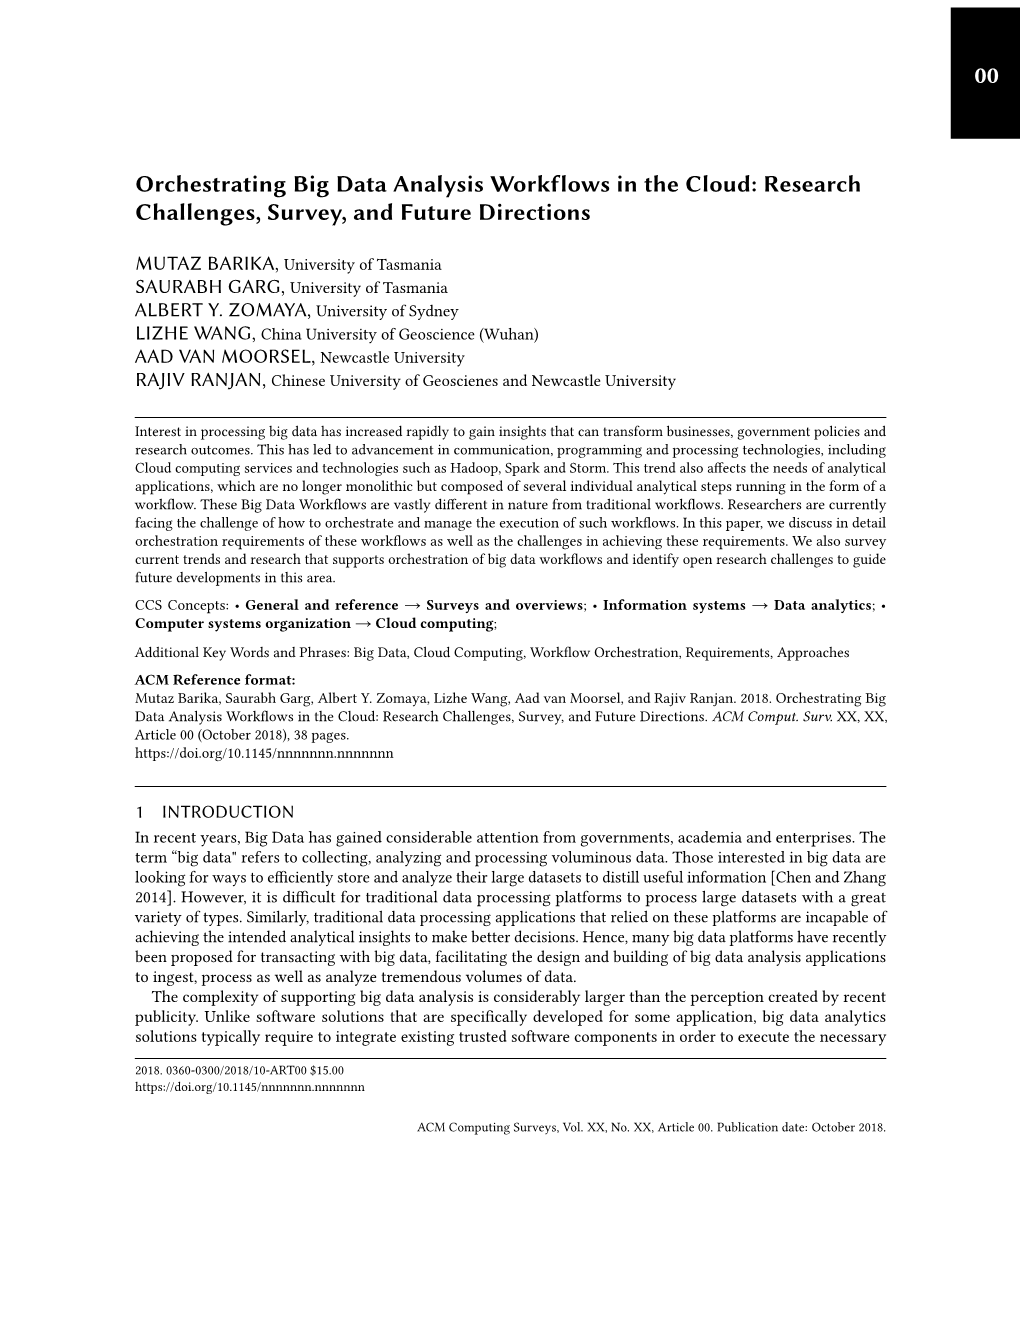 Orchestrating Big Data Analysis Workflows in the Cloud: Research Challenges, Survey, and Future Directions